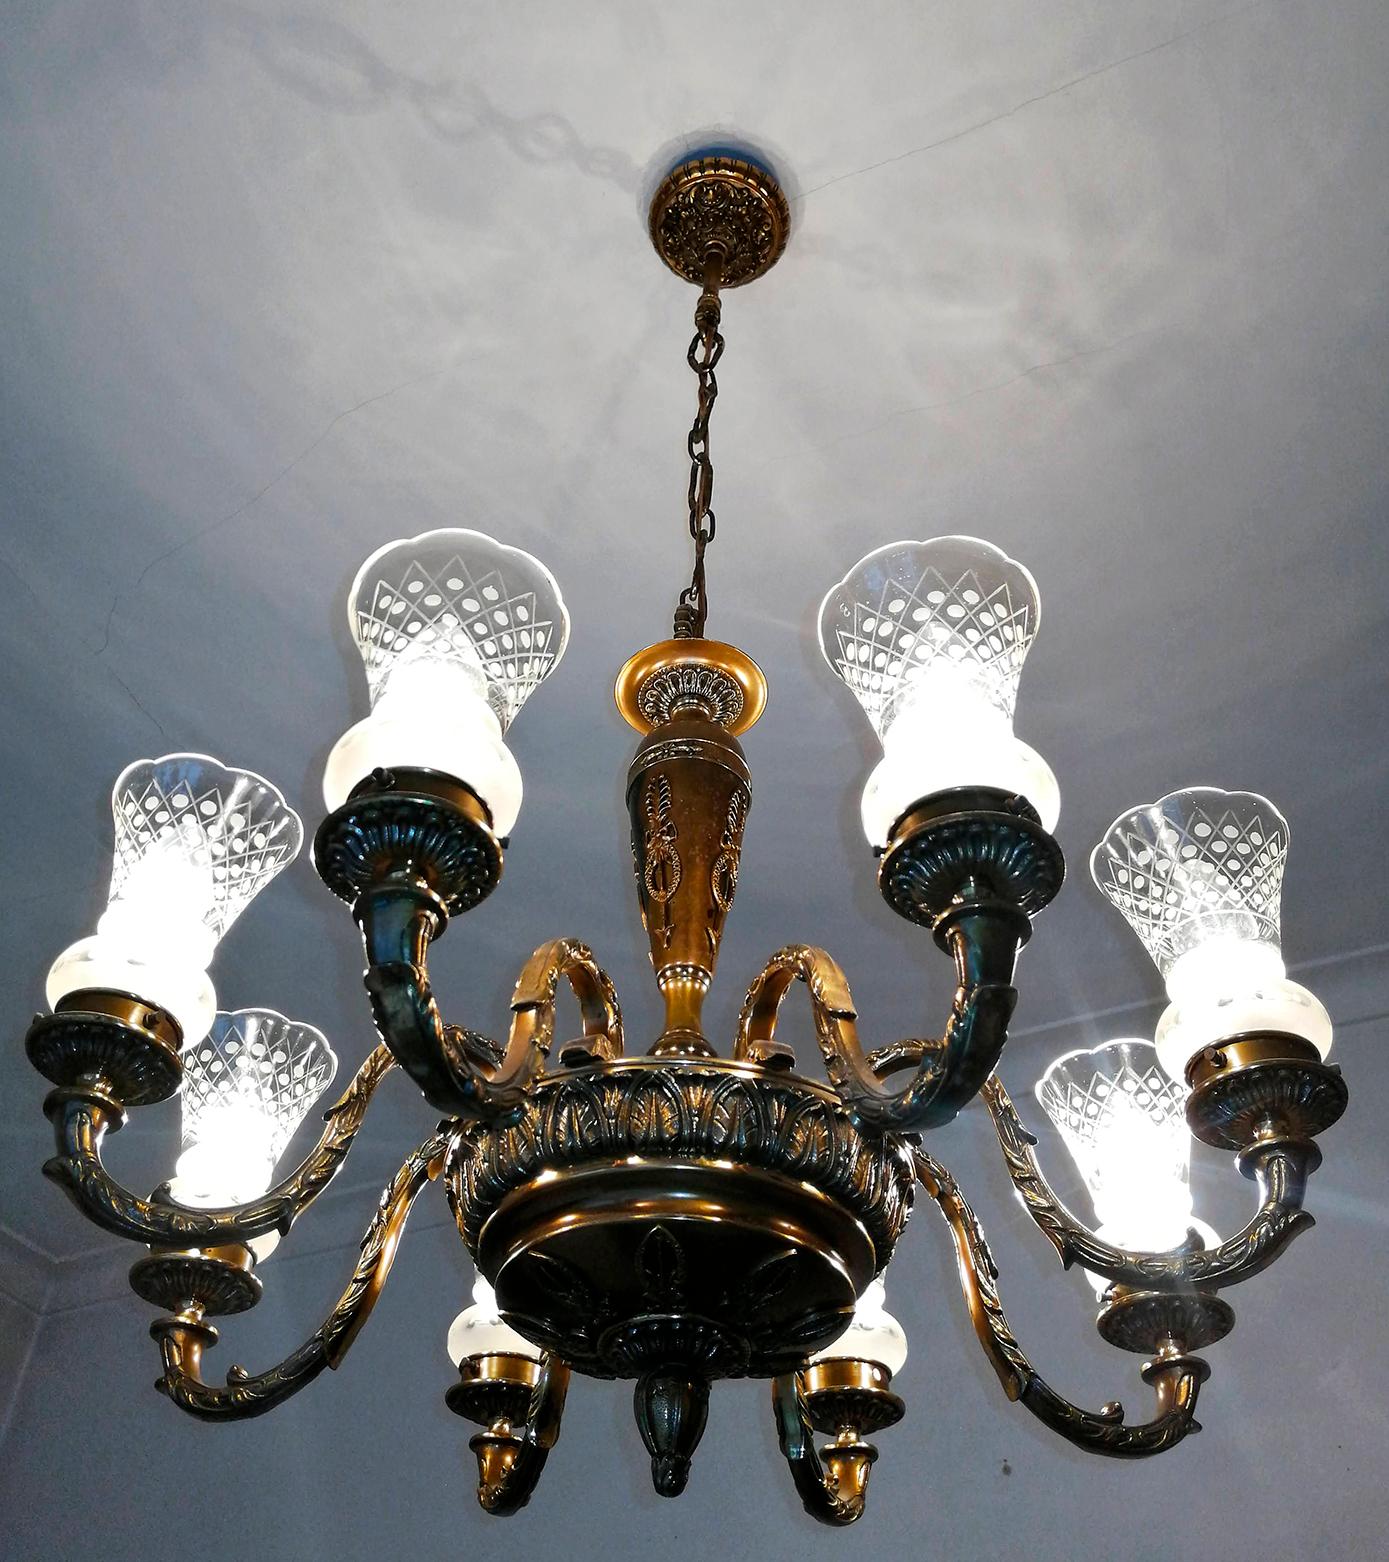 Antique French Empire Neoclassical Gilt Bronze Chandelier, Early 20th Century For Sale 5